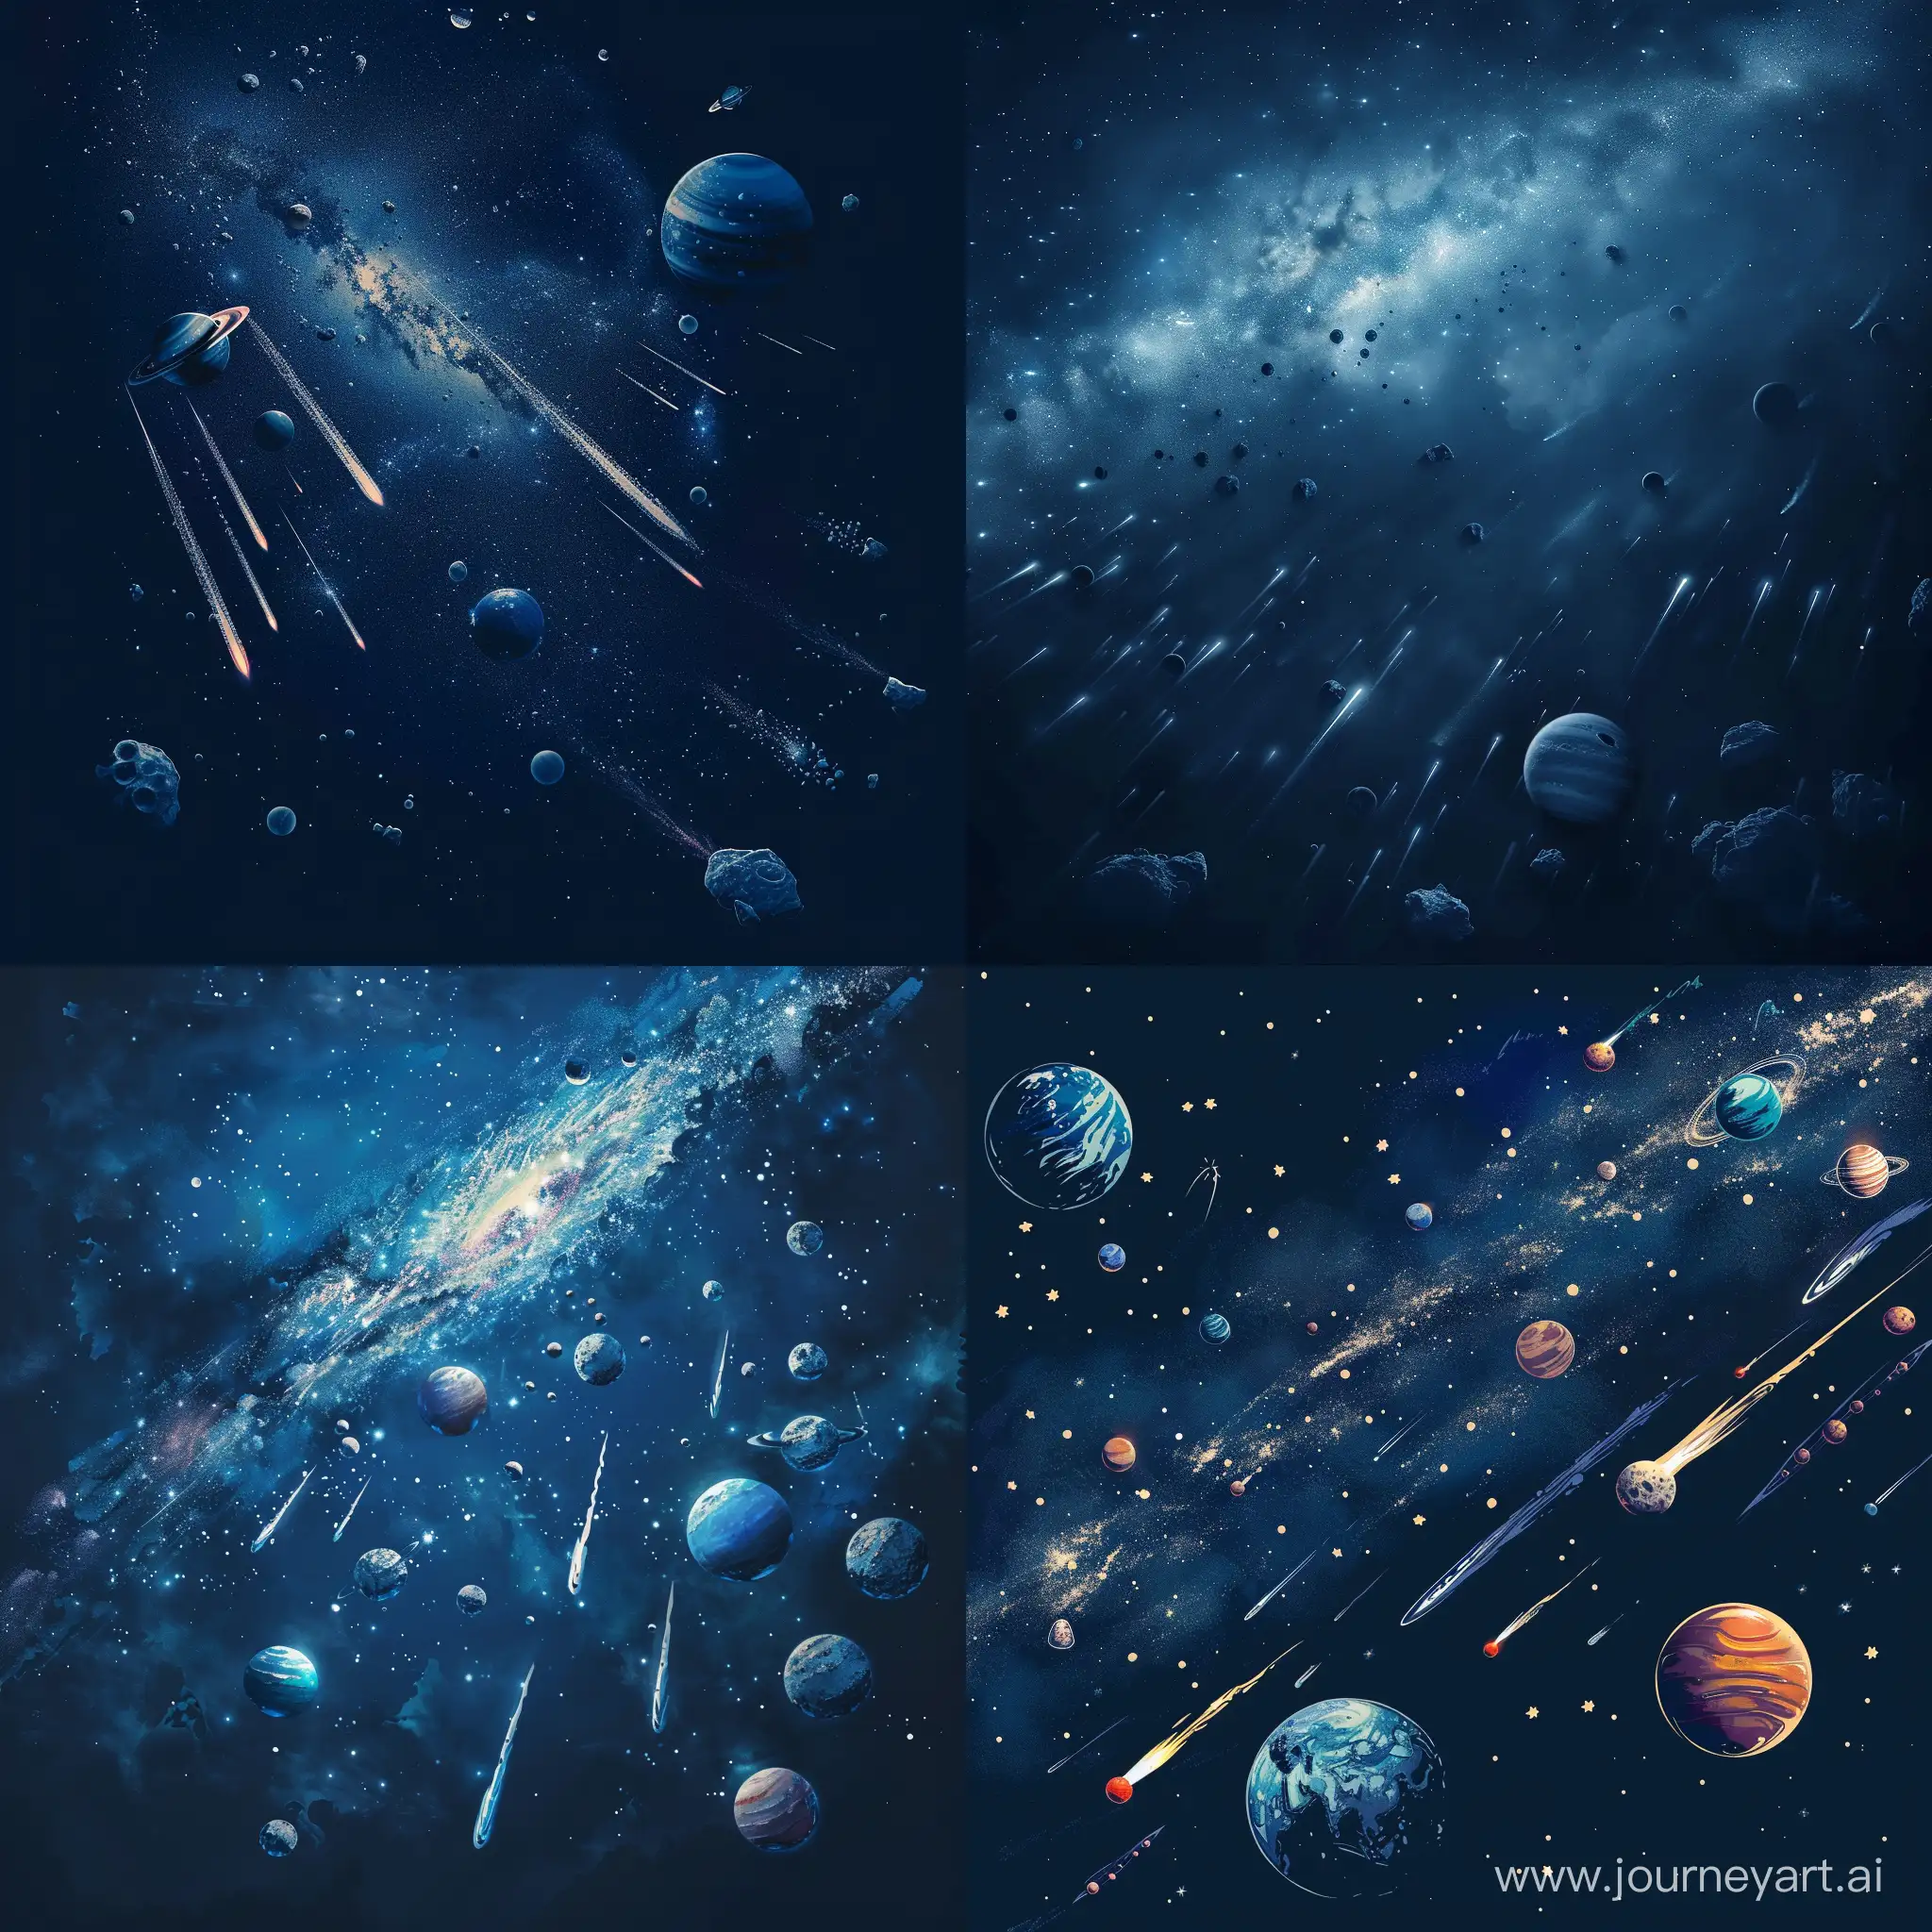 Cosmic-Scene-with-Dark-Blue-Background-and-Planets-in-the-Milky-Way